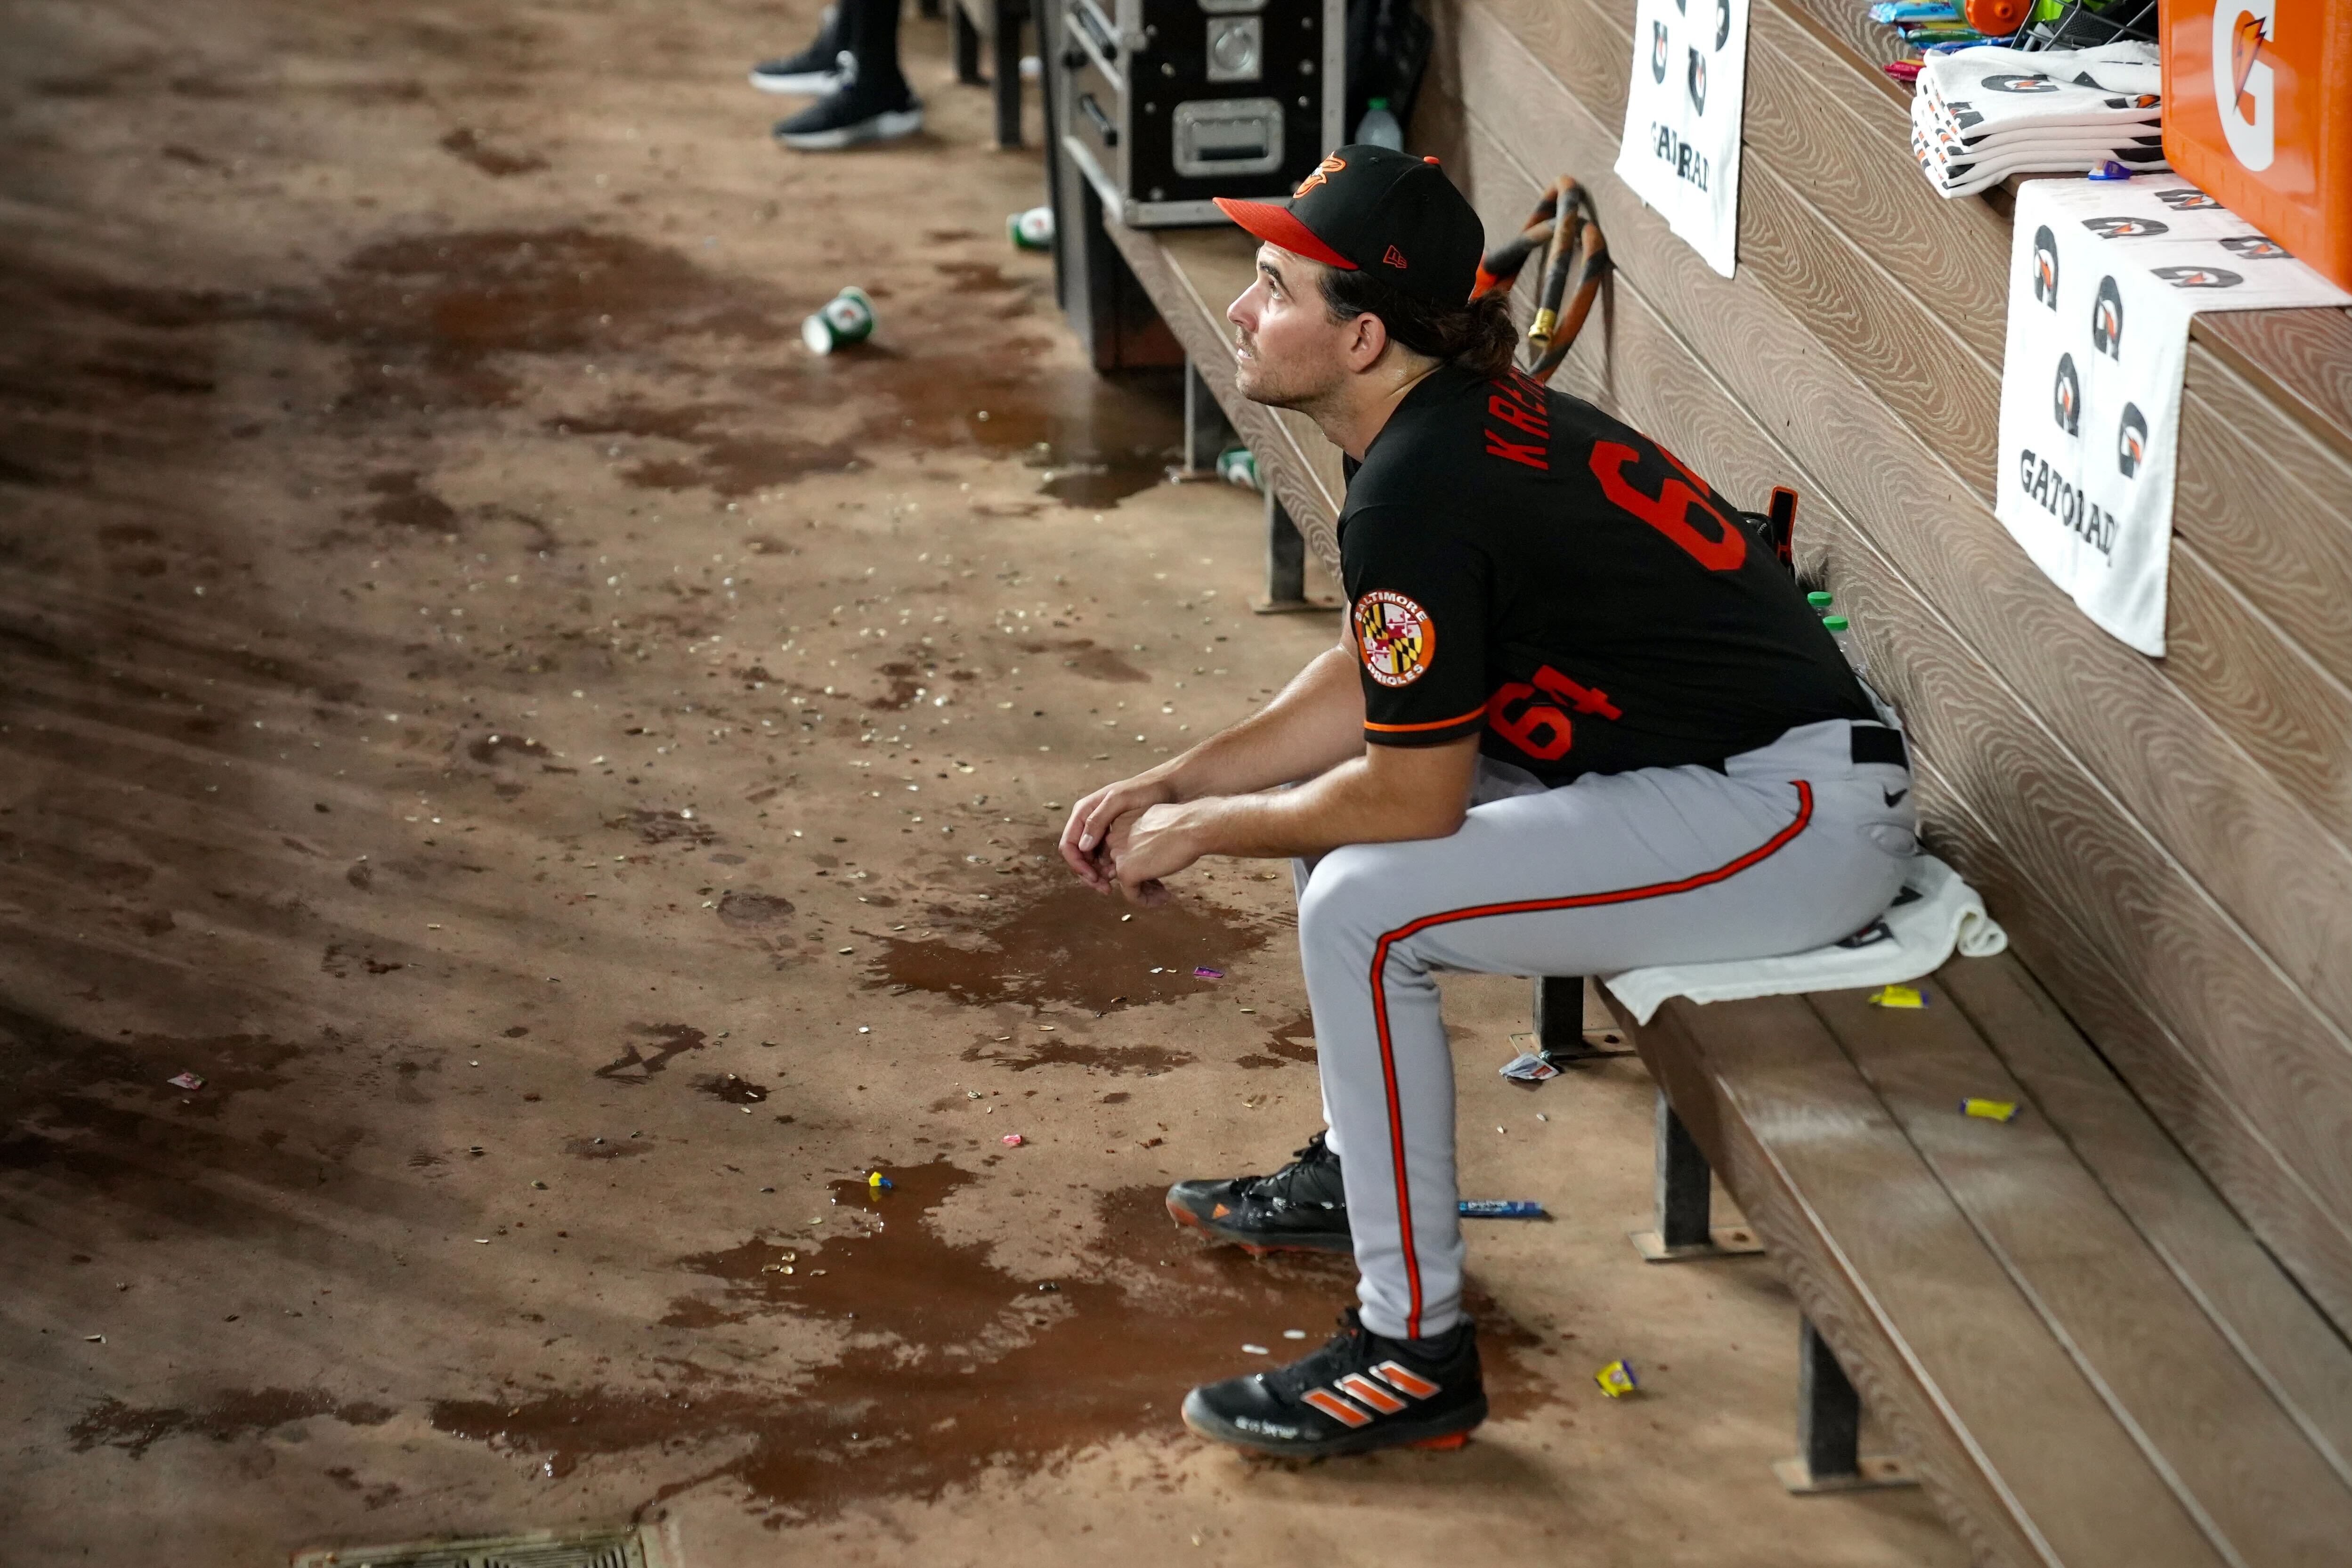 It's over: Magical Orioles season comes to resounding end with